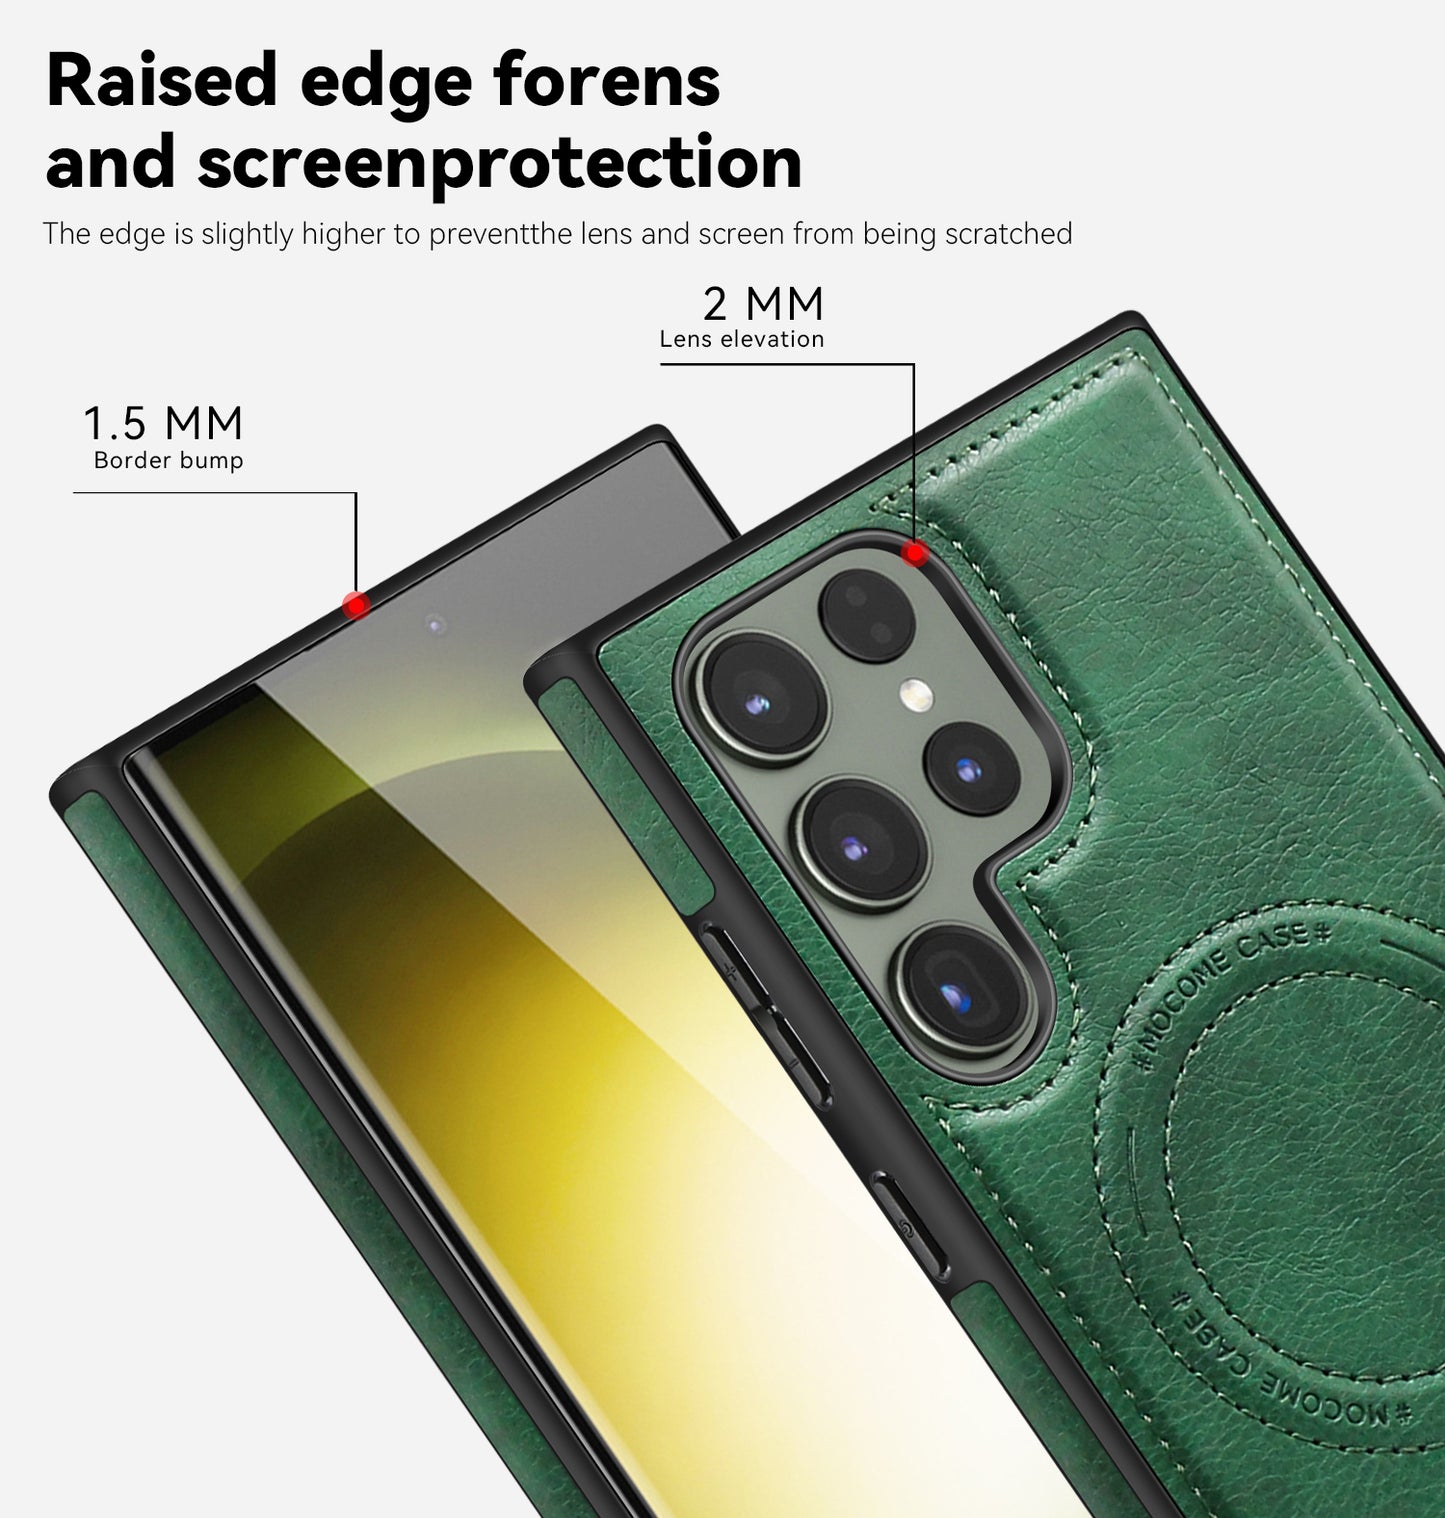 Magnetic Wireless Charging Leather Case With Foldable Kickstand For Samsung Galaxy